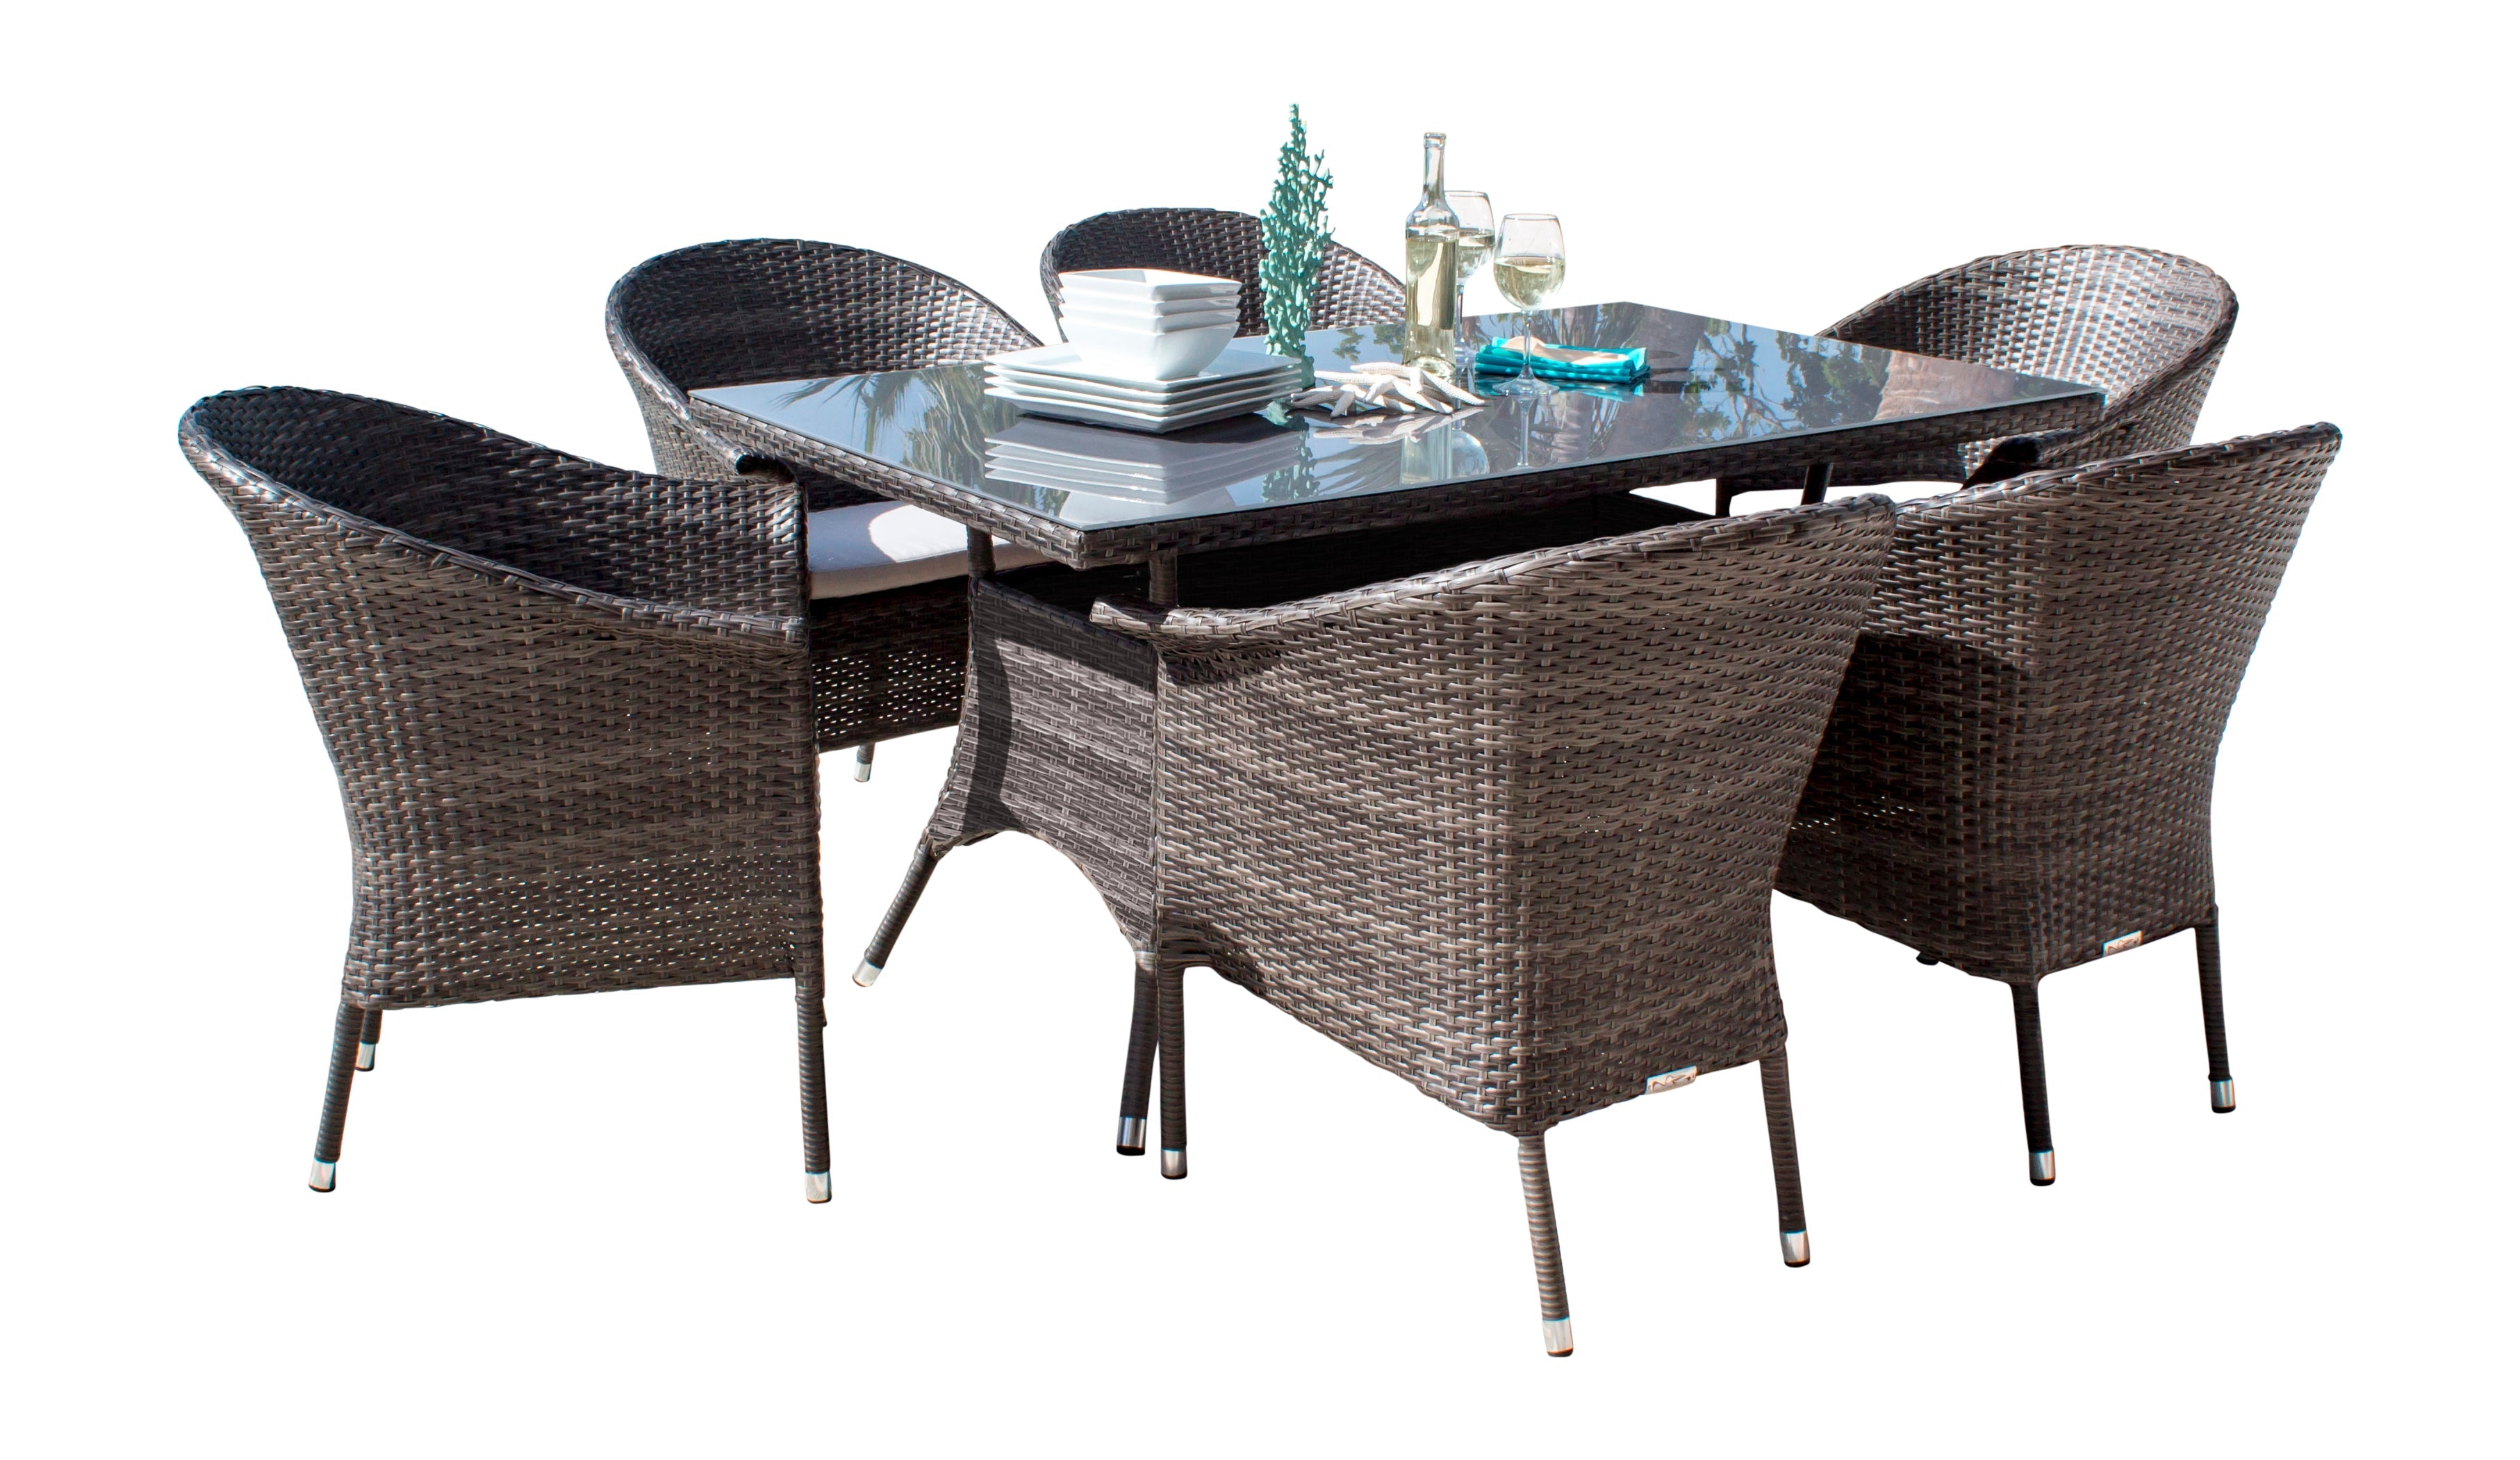 Hospitality Rattan Ultra 7-Piece Woven Armchair Dining Set with Cushions